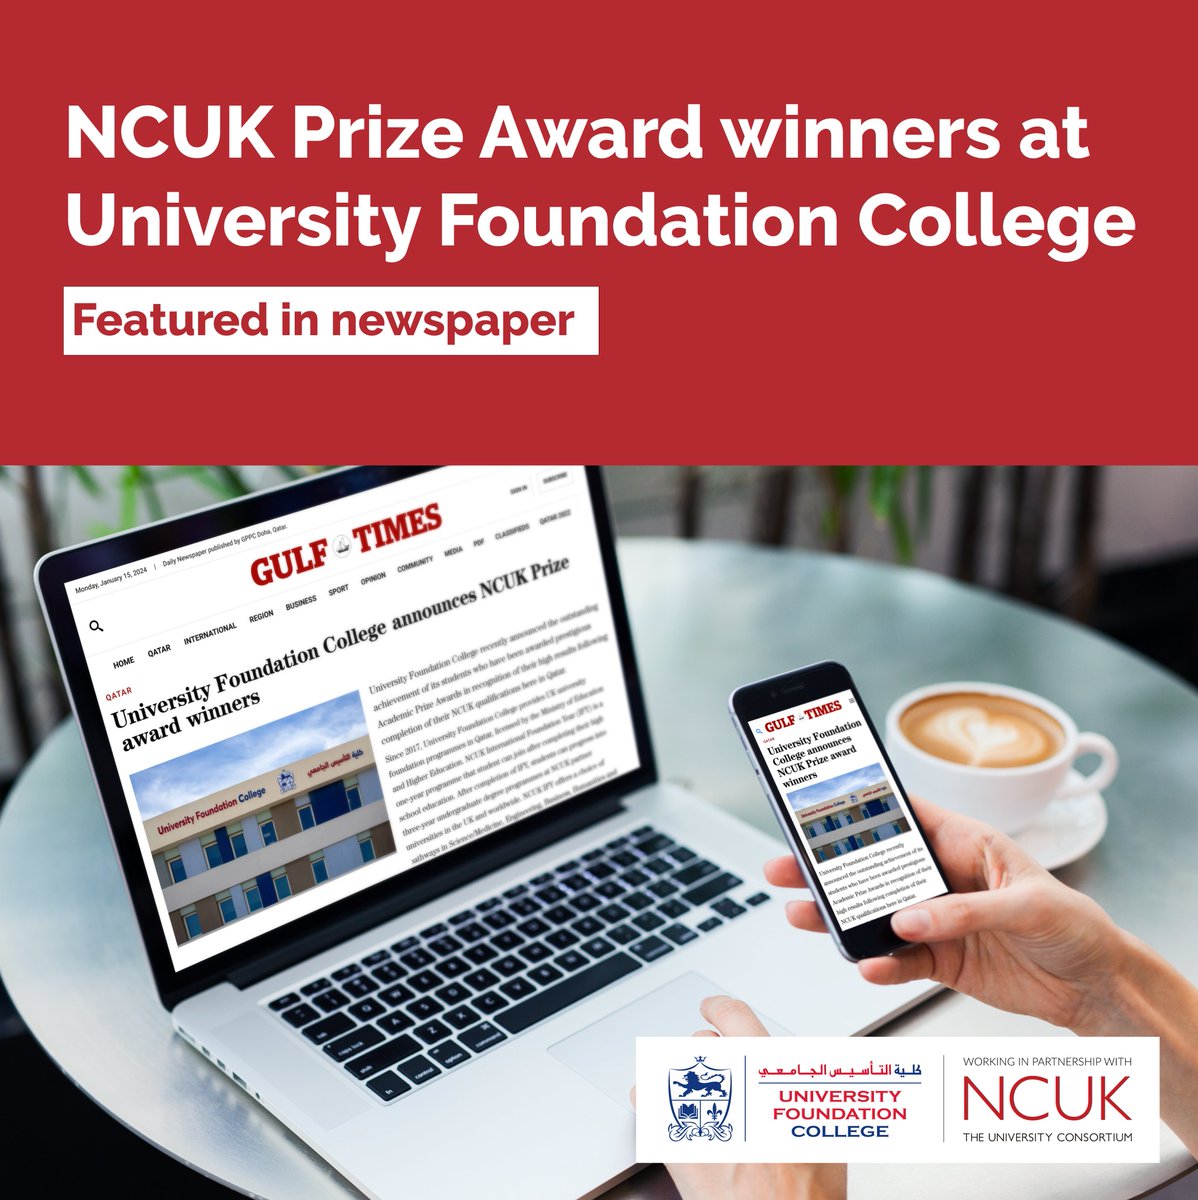 NCUK Prize Award winners at University Foundation College are featured in the Gulf Times newspaper!

Check out the news article here:
gulf-times.com/article/675533…

@NCUKTogether
@GulfTimes_QATAR

#UKEducation #UKDegree #FoundationCourse #UniversityFoundationCollege #Qatar #Doha